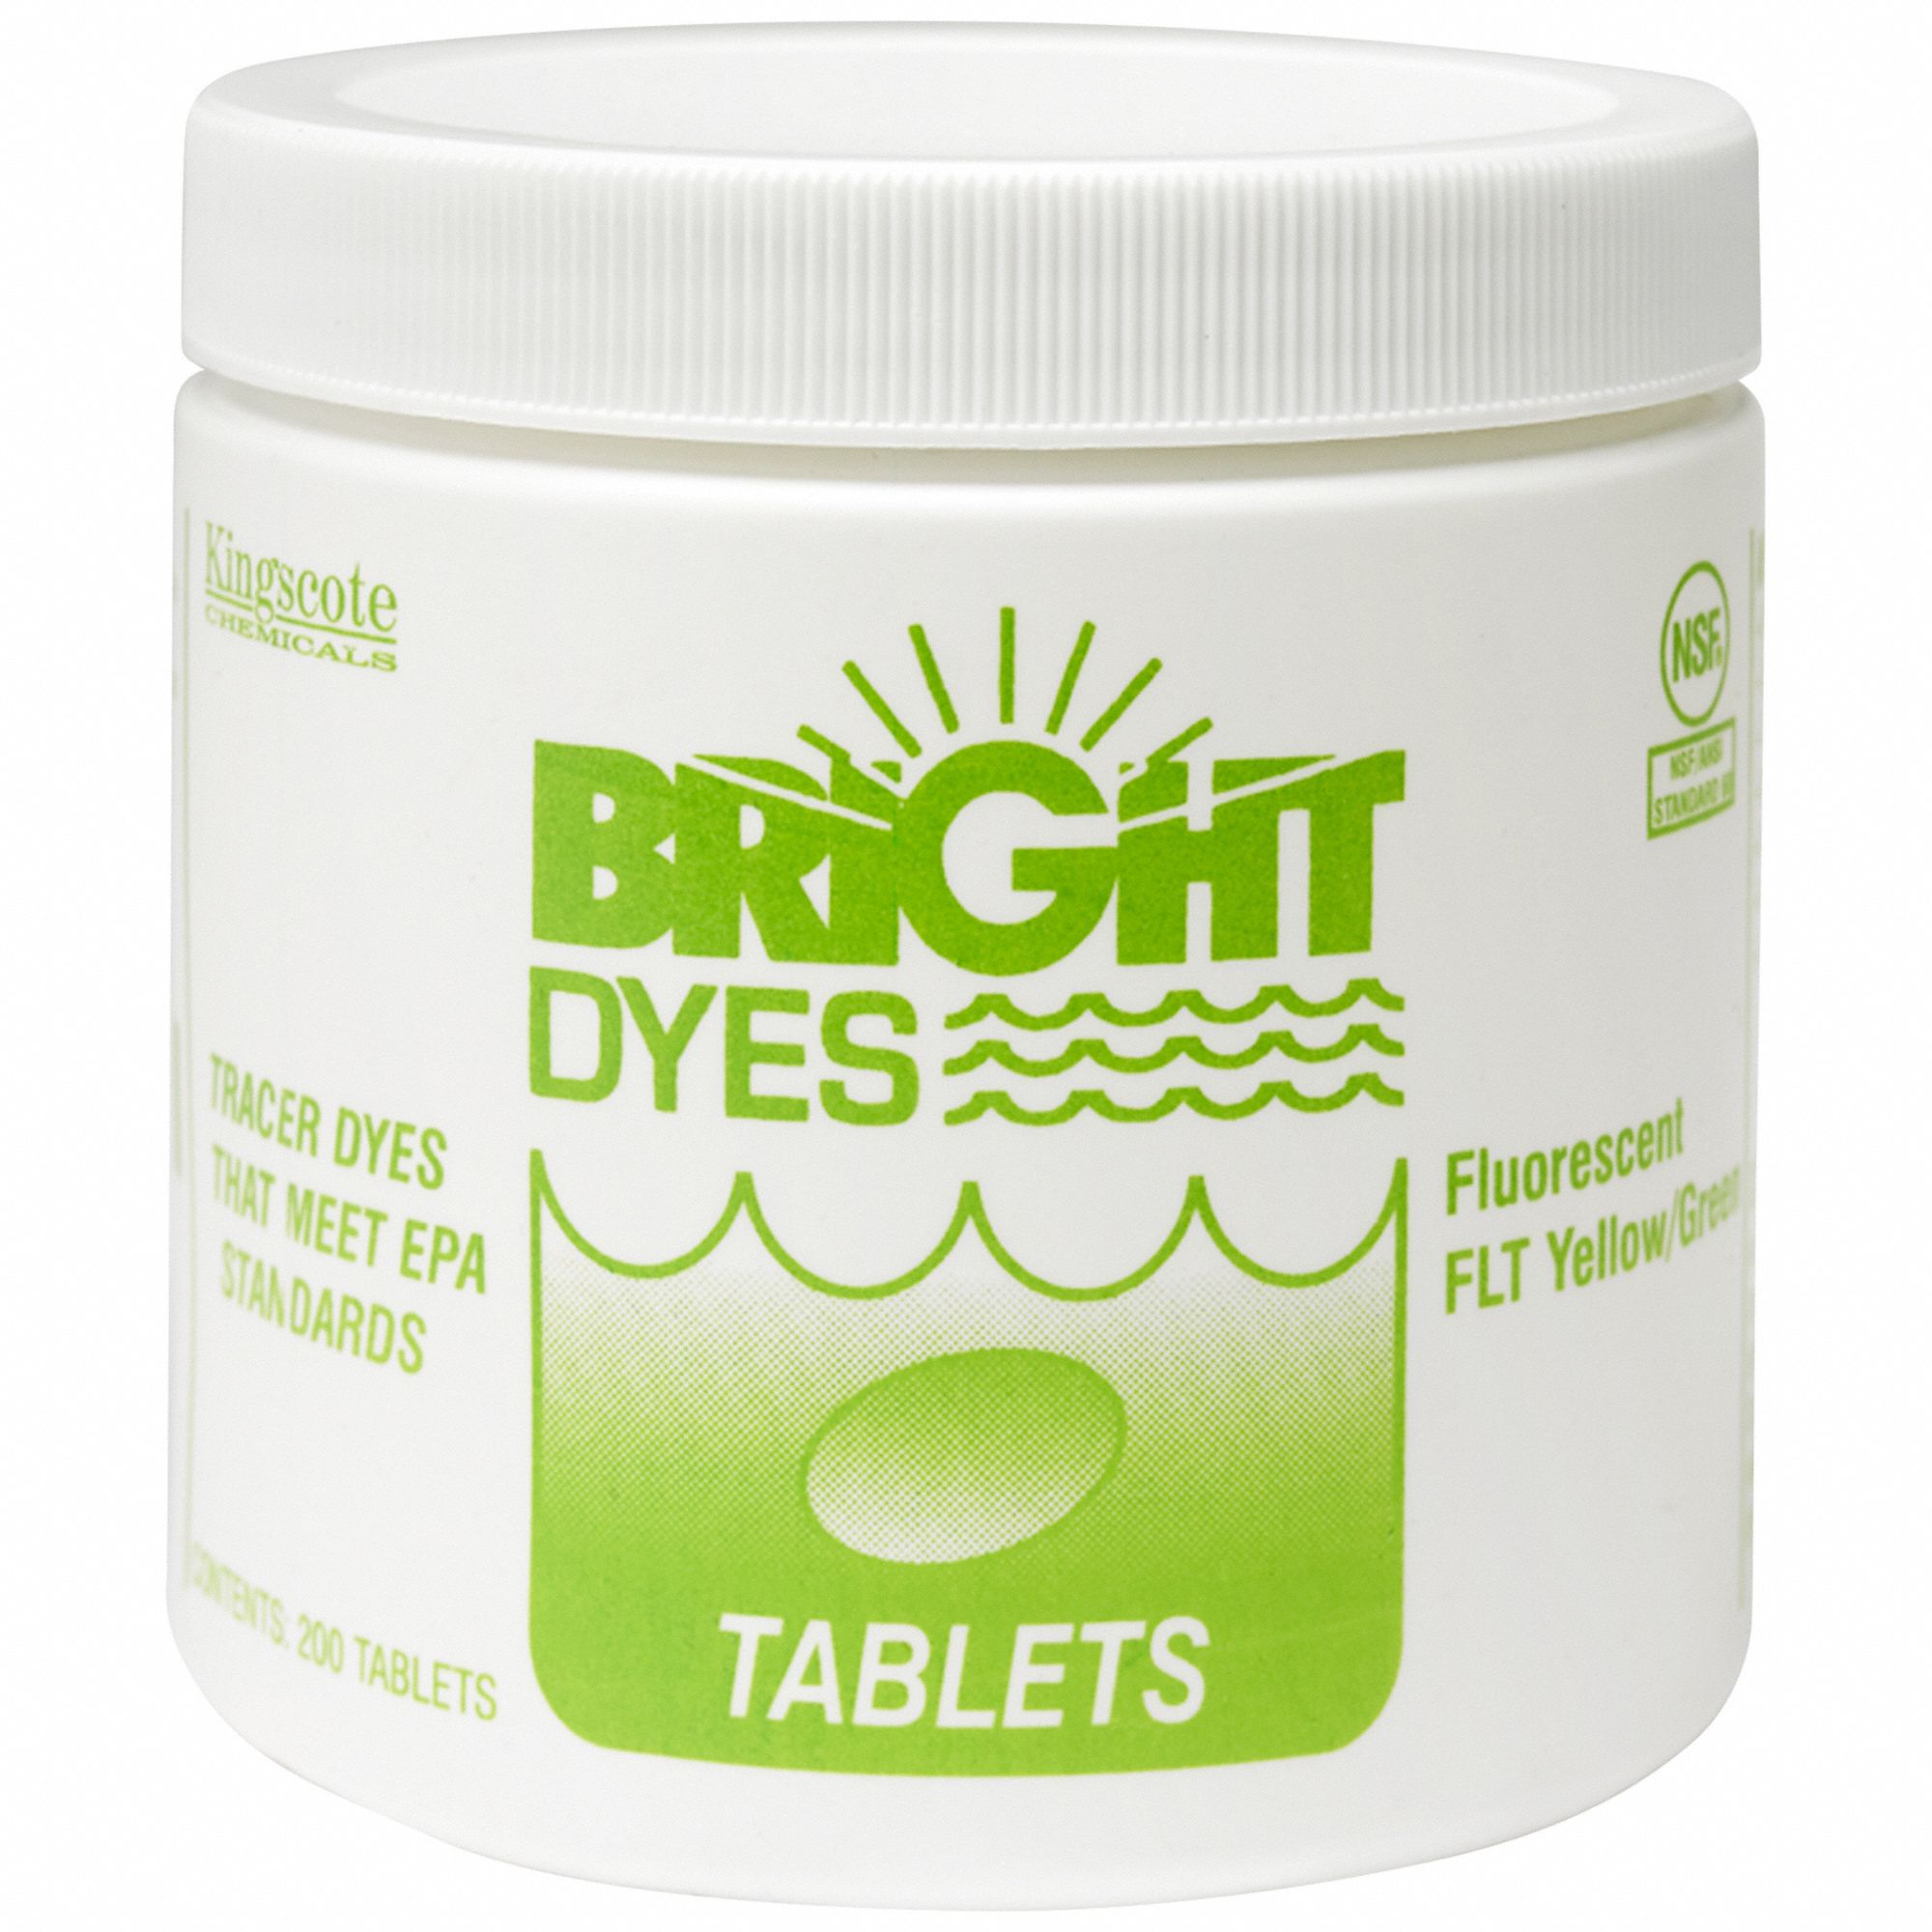 Dye Tracer Tablet: Yellow/Green, 1.35 g Container Size, Water Tracing Dye, 3 to 6 min